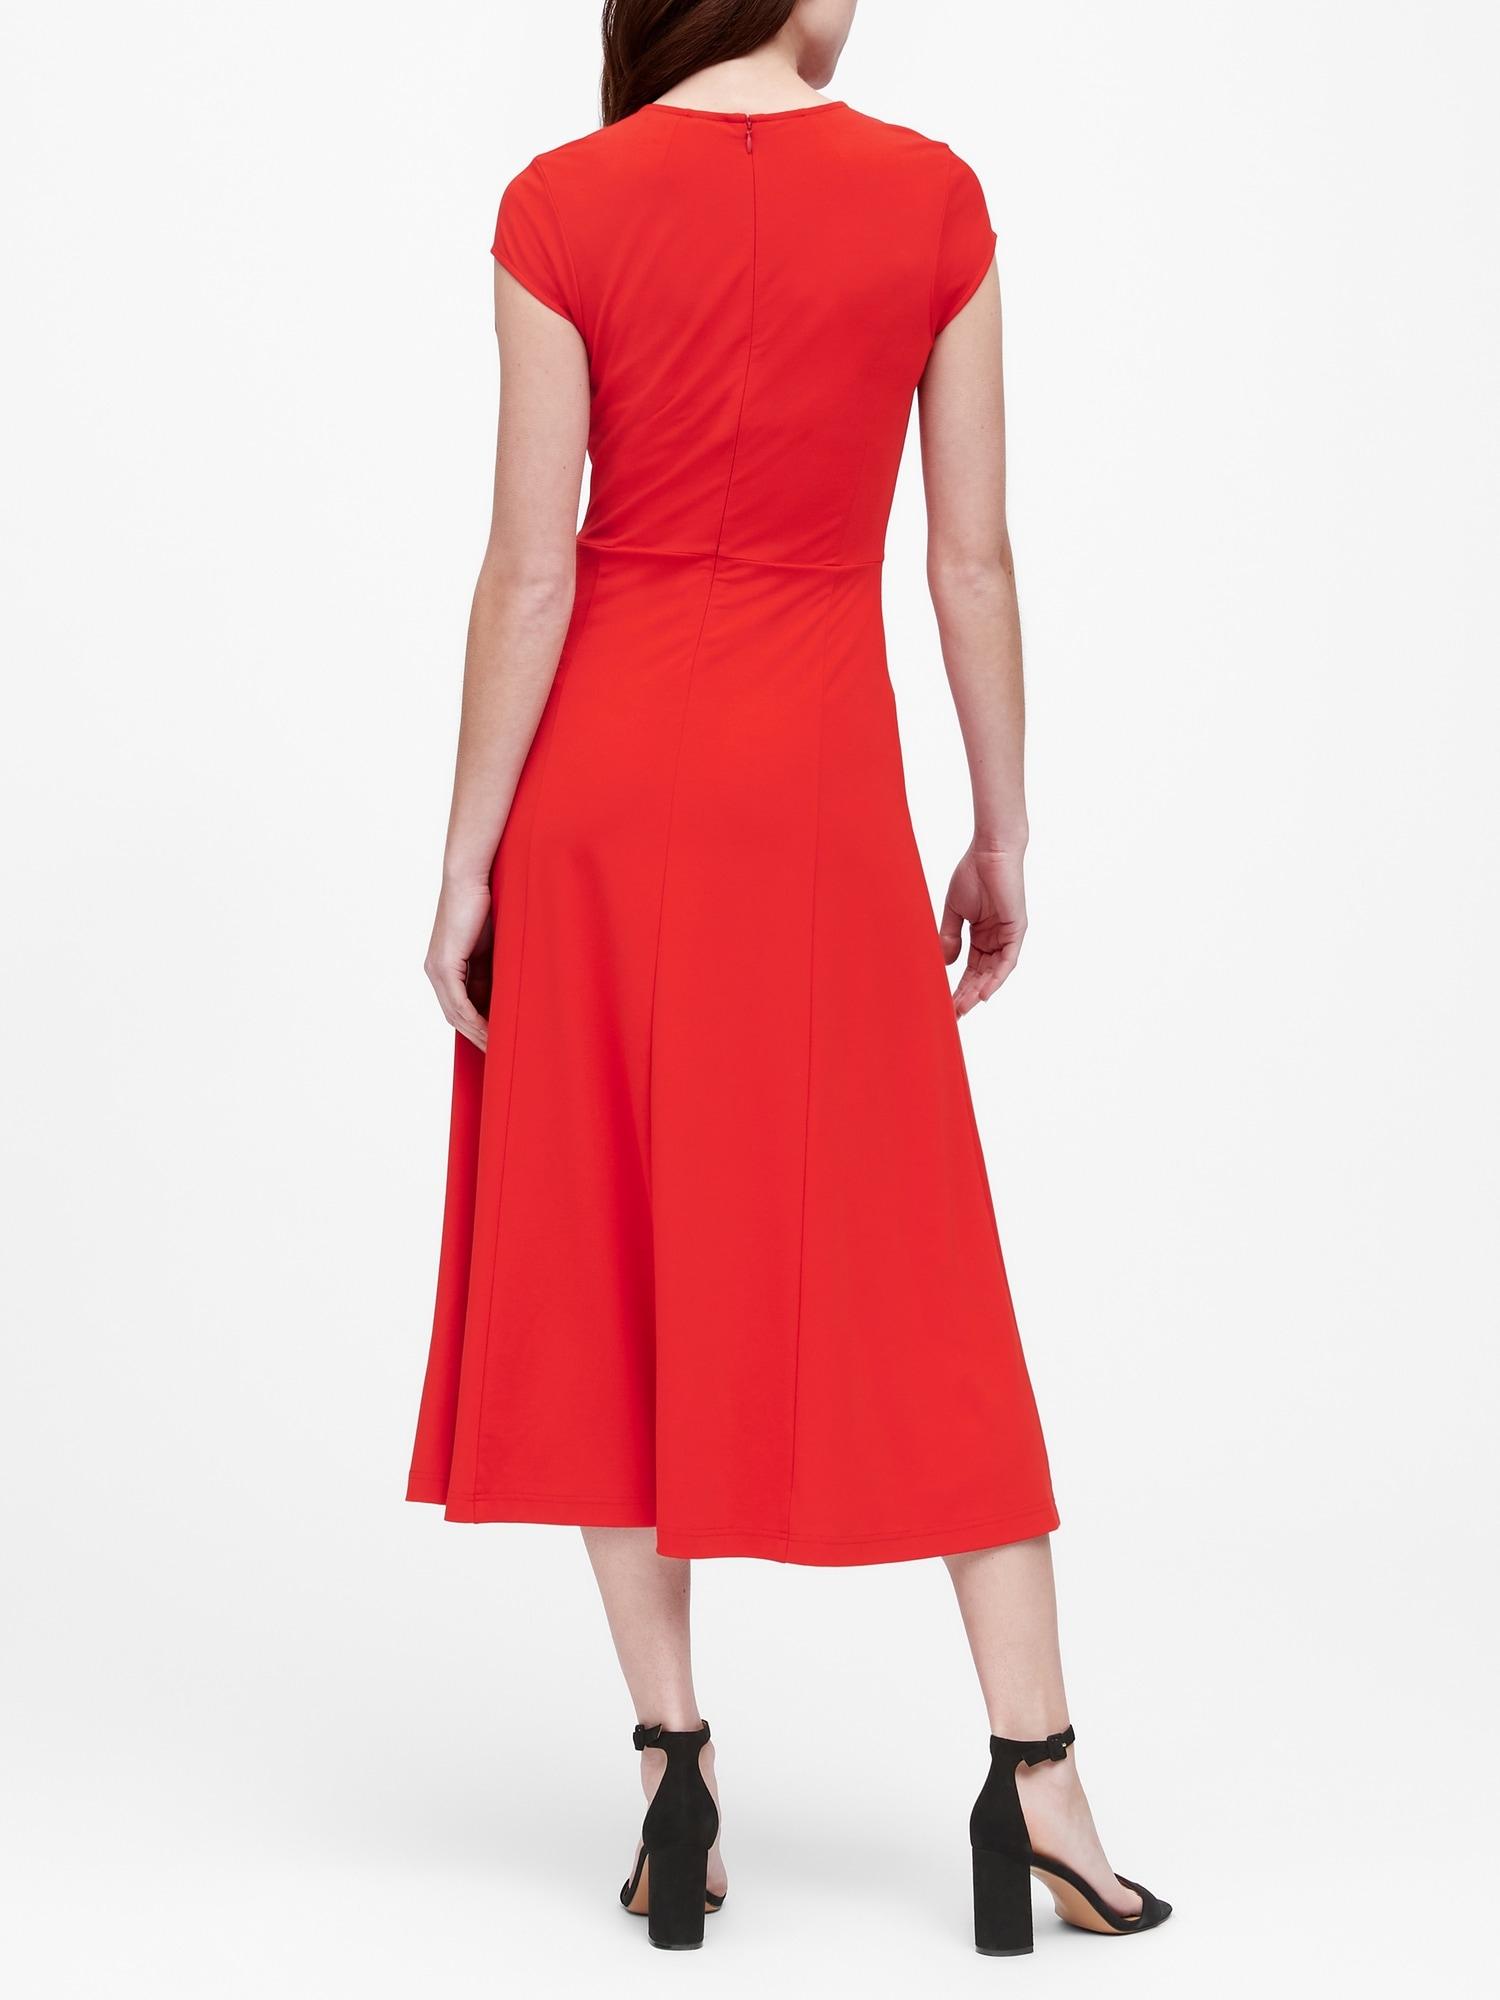 Banana Republic Soft Ponte Midi Dress With Slit in Ultra Red (Red) - Lyst